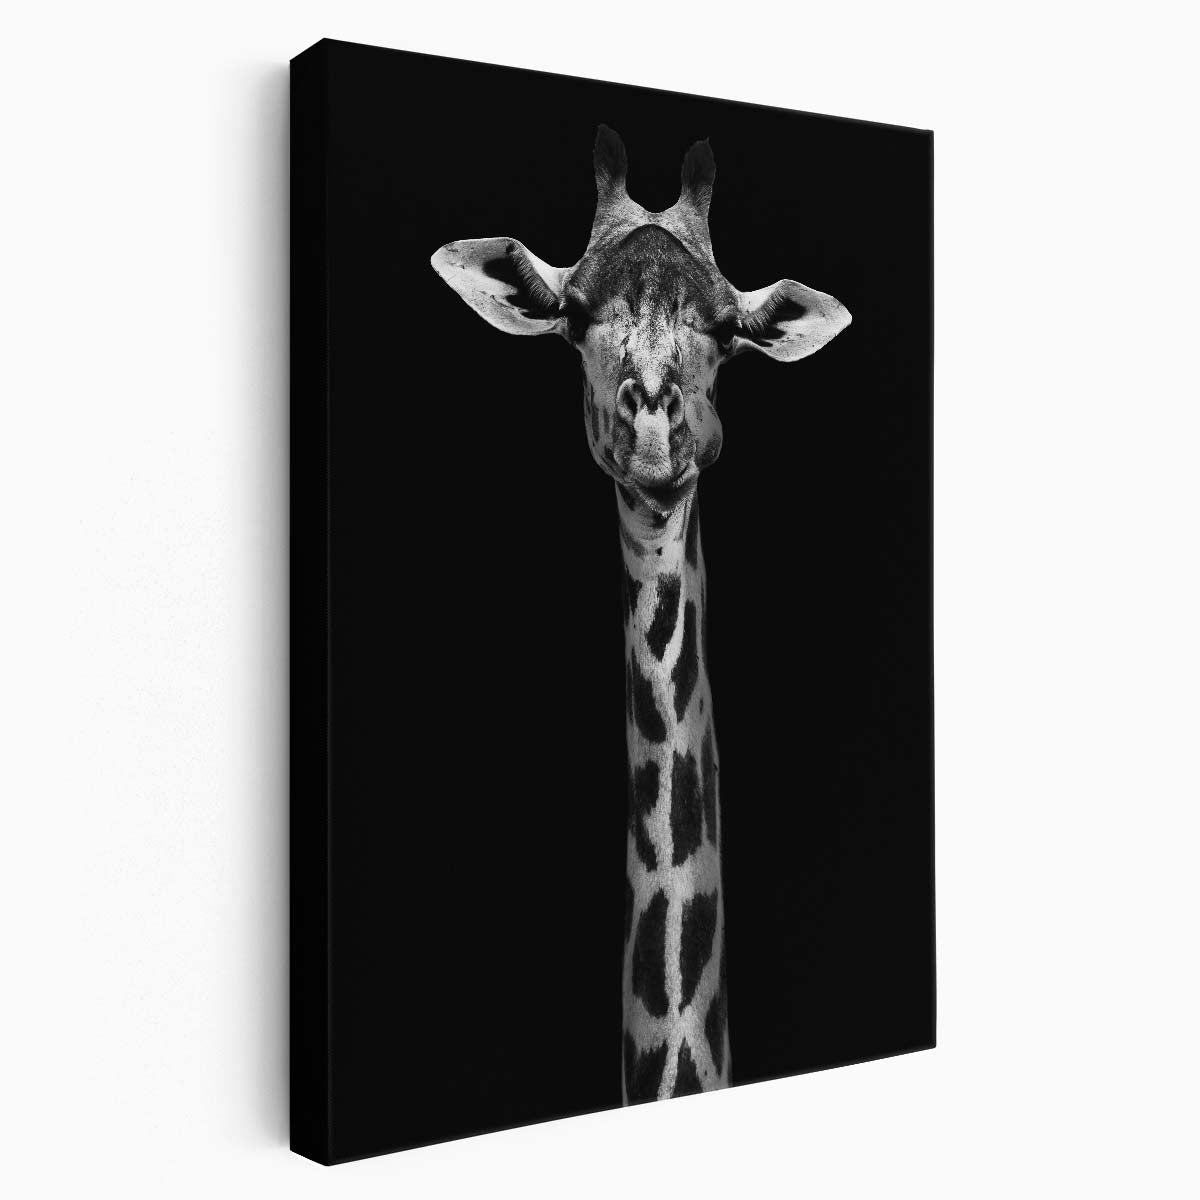 Minimalistic Black and White African Giraffe Portrait Photography by Luxuriance Designs, made in USA